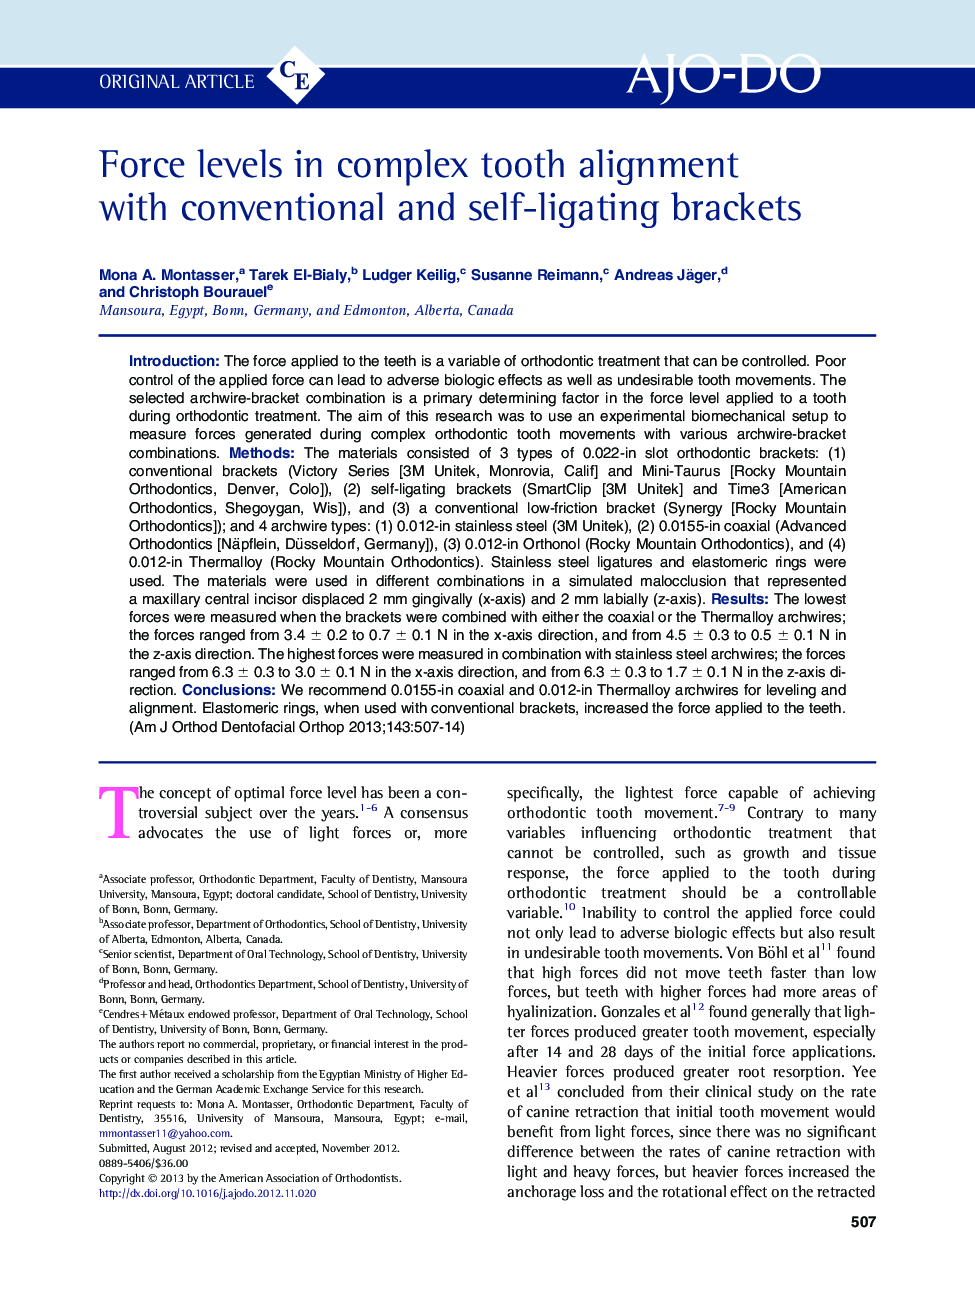 Force levels in complex tooth alignment with conventional and self-ligating brackets 